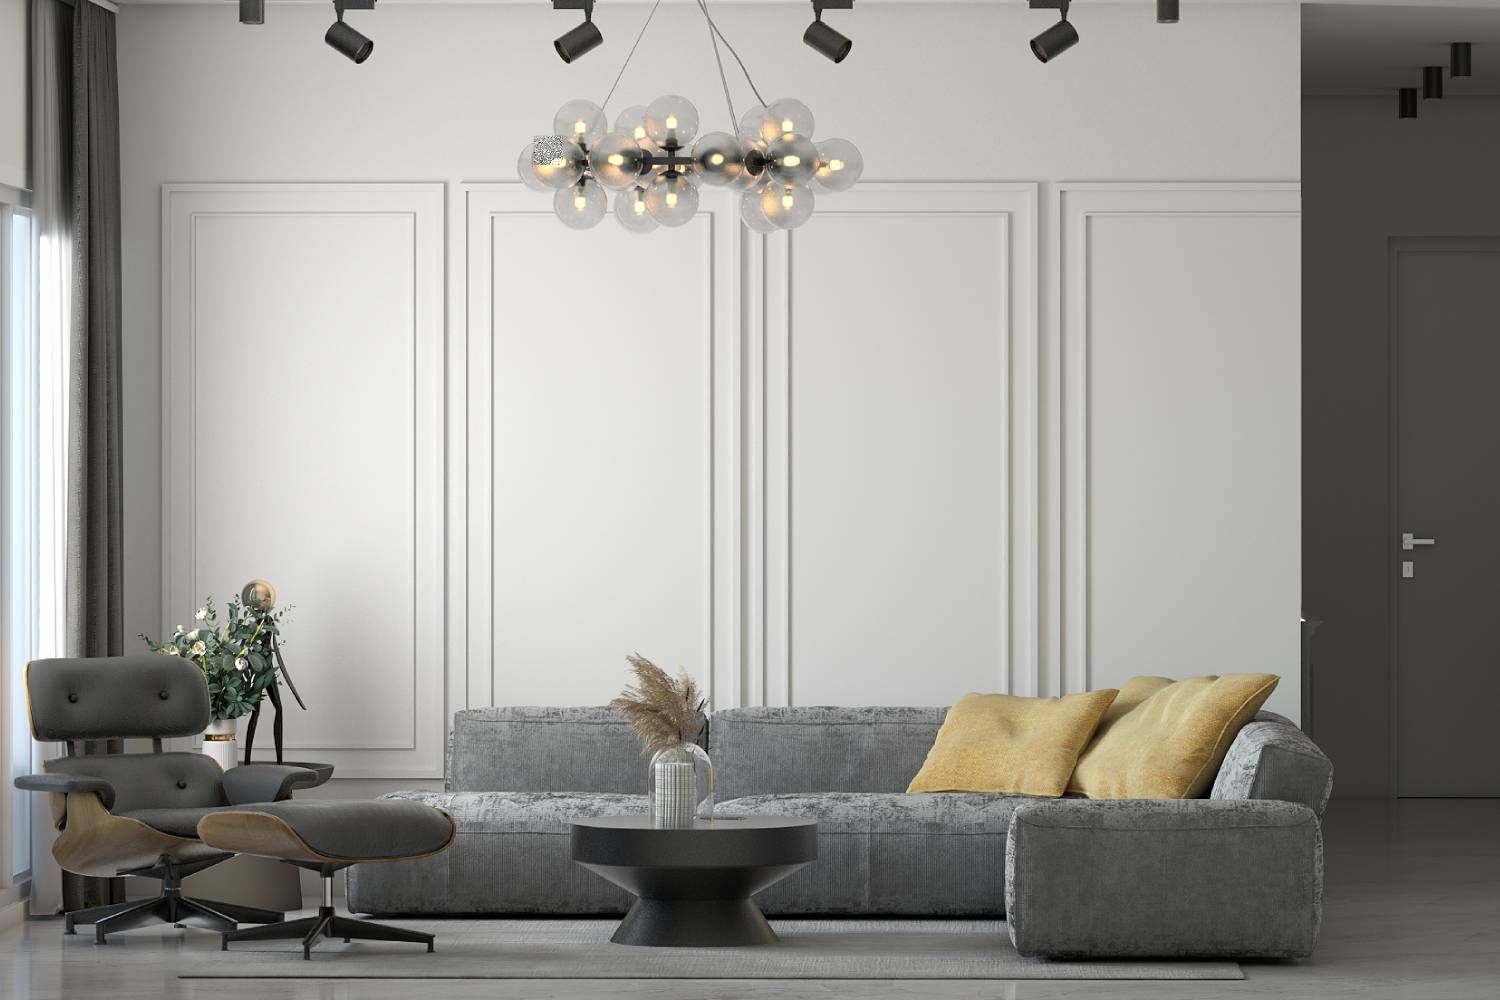 Modern Living Room Design With A Grey L-Shaped Sofa